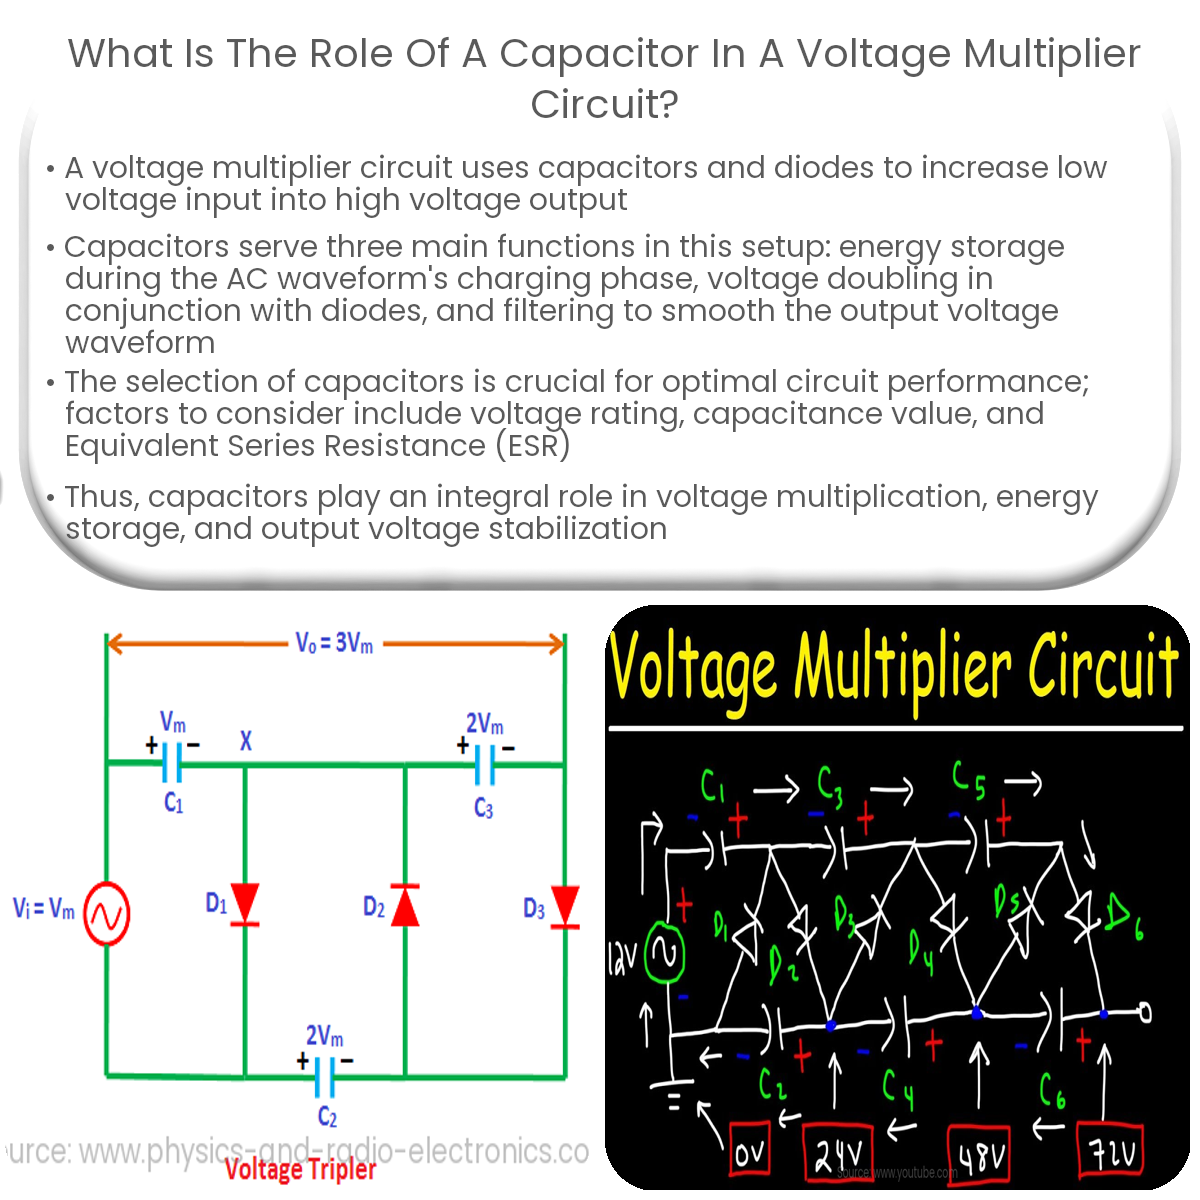 What is the role of a capacitor in a voltage multiplier circuit?